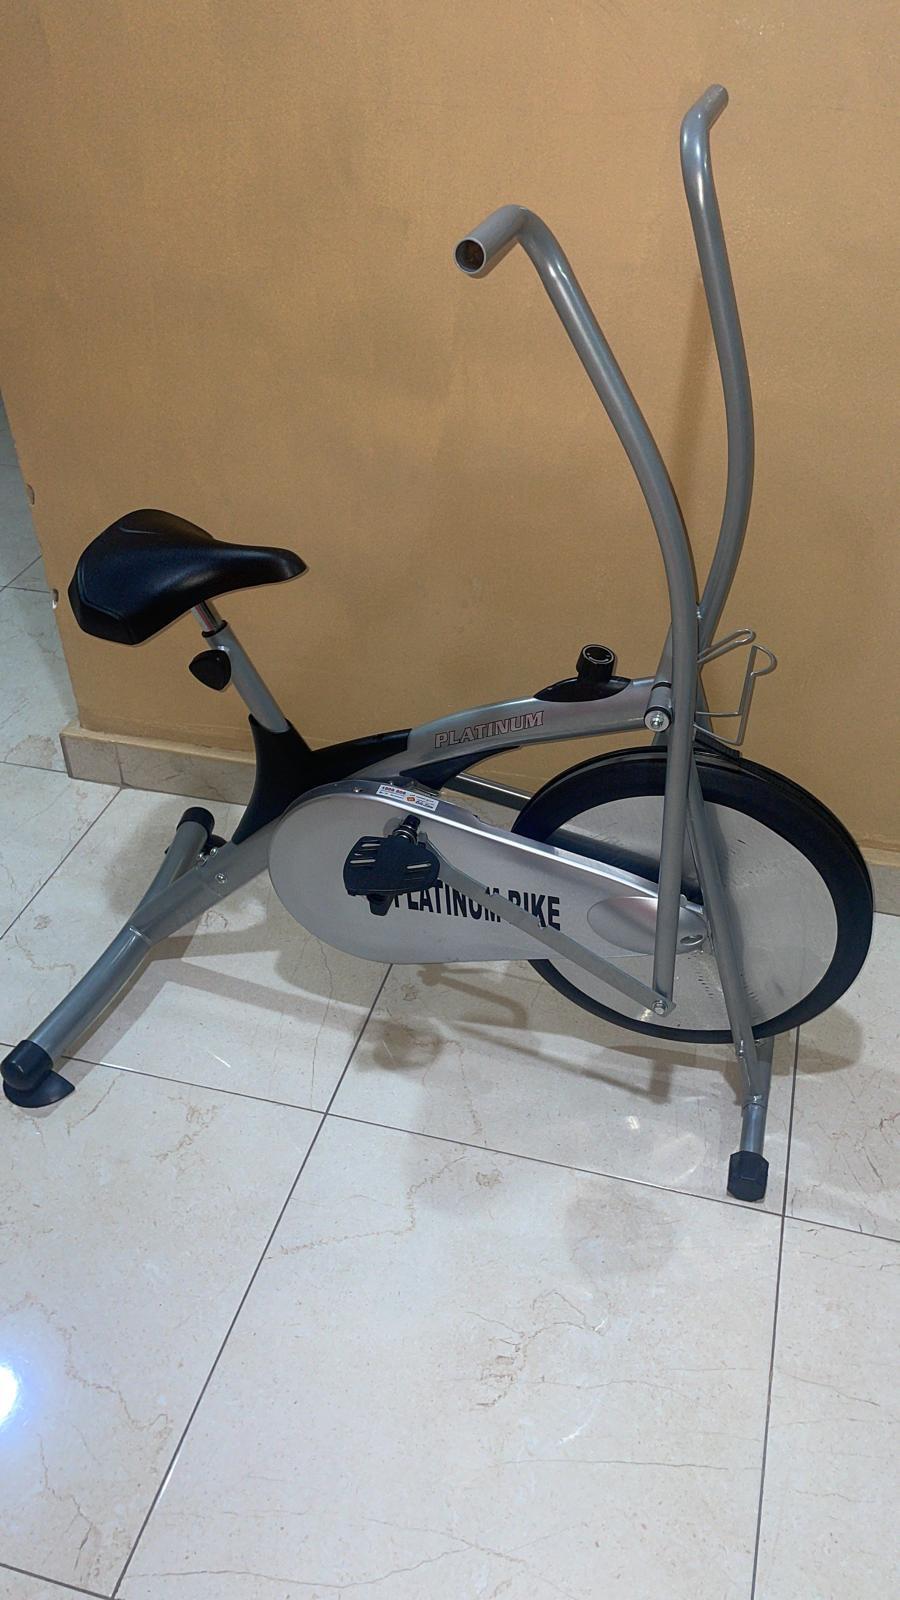 Brand new treadmill and cycling machine for sale in a very discounted price.